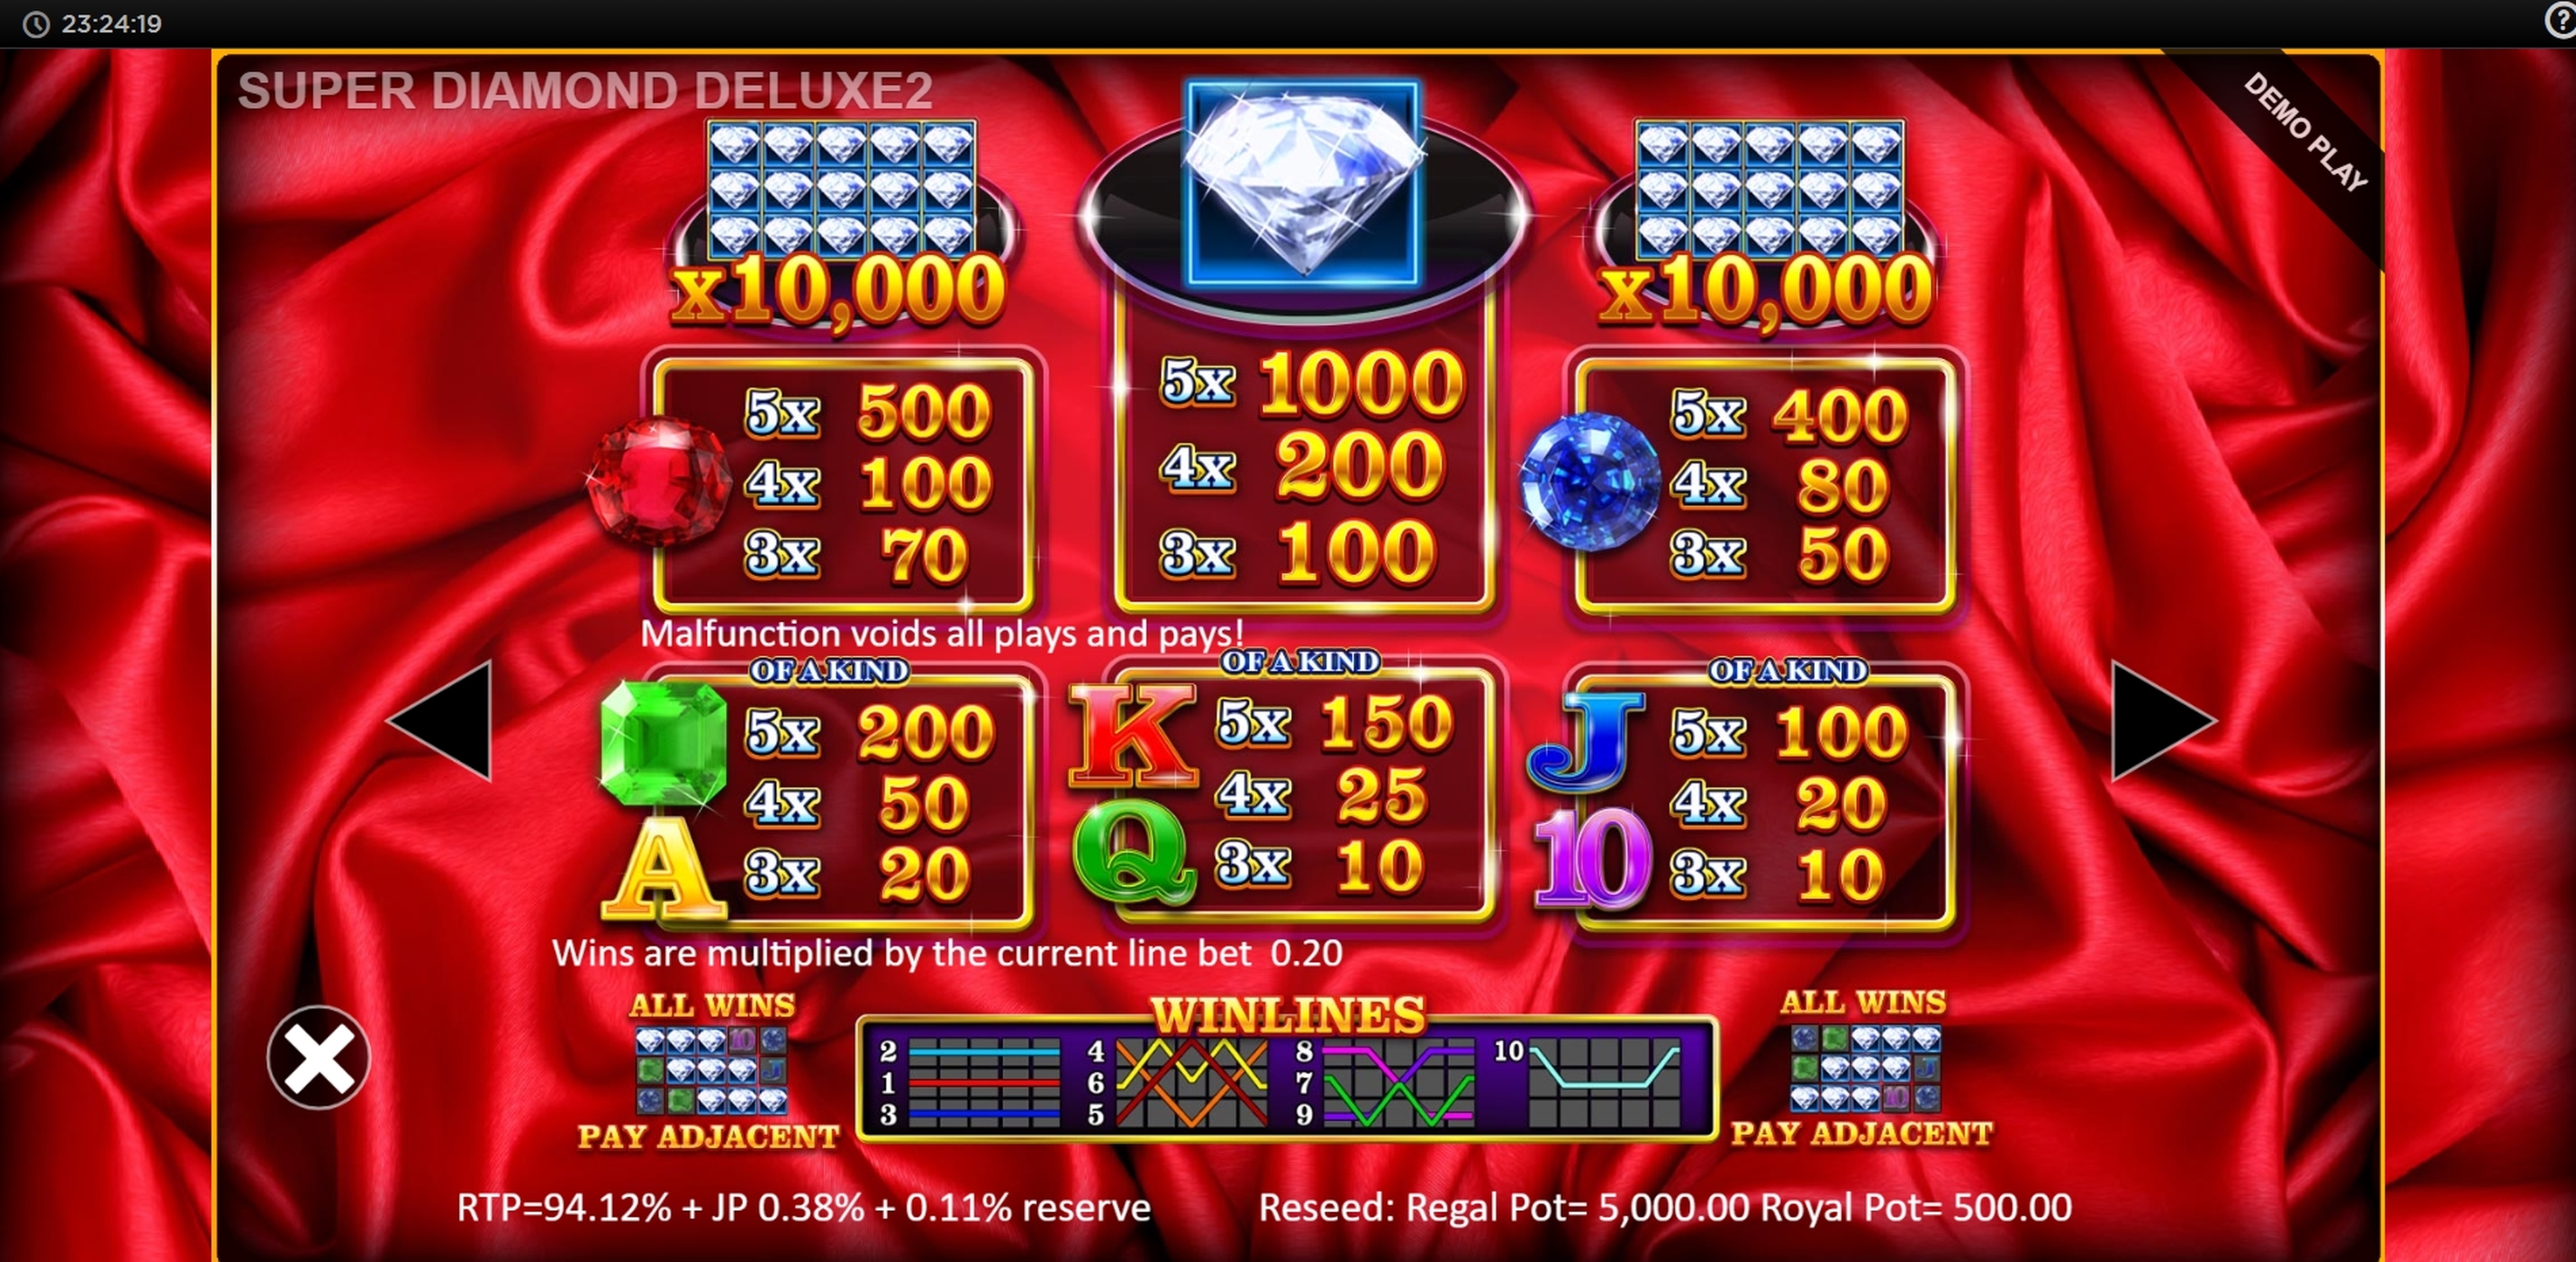 Info of Super Diamond Deluxe Slot Game by Blueprint Gaming